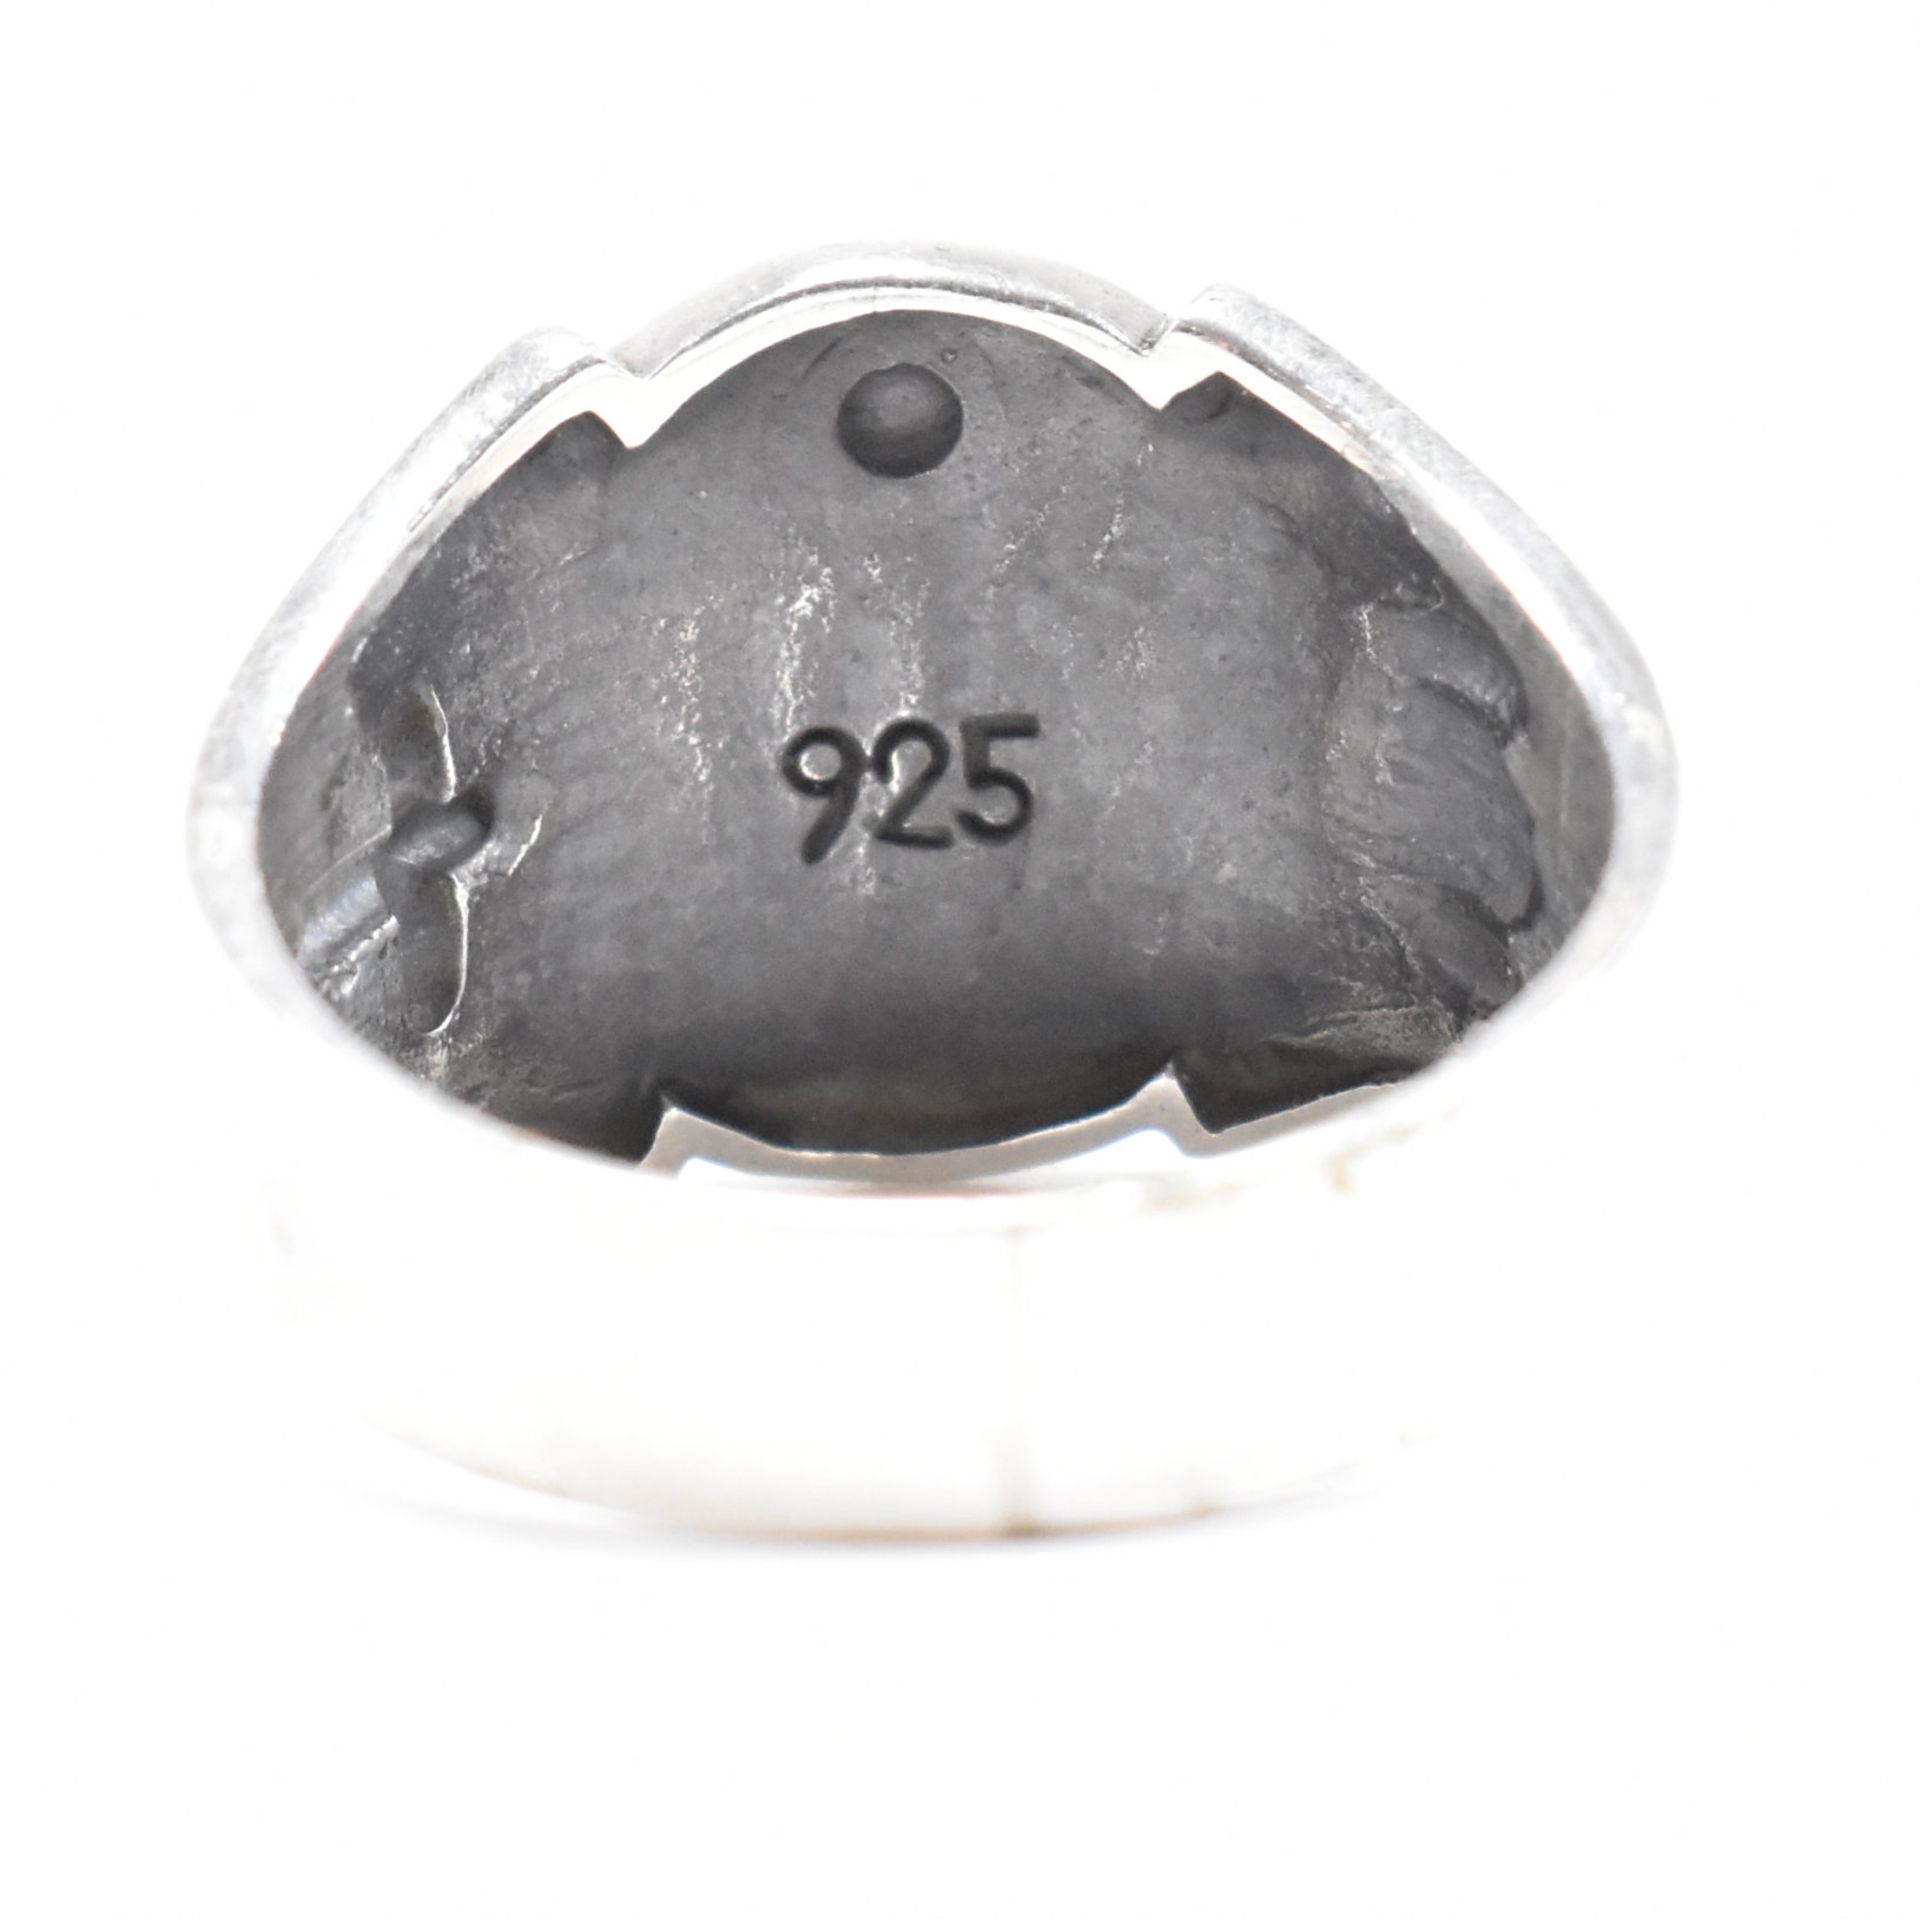 CONTEMPORARY 925 SILVER MASONIC STYLE RING - Image 5 of 7